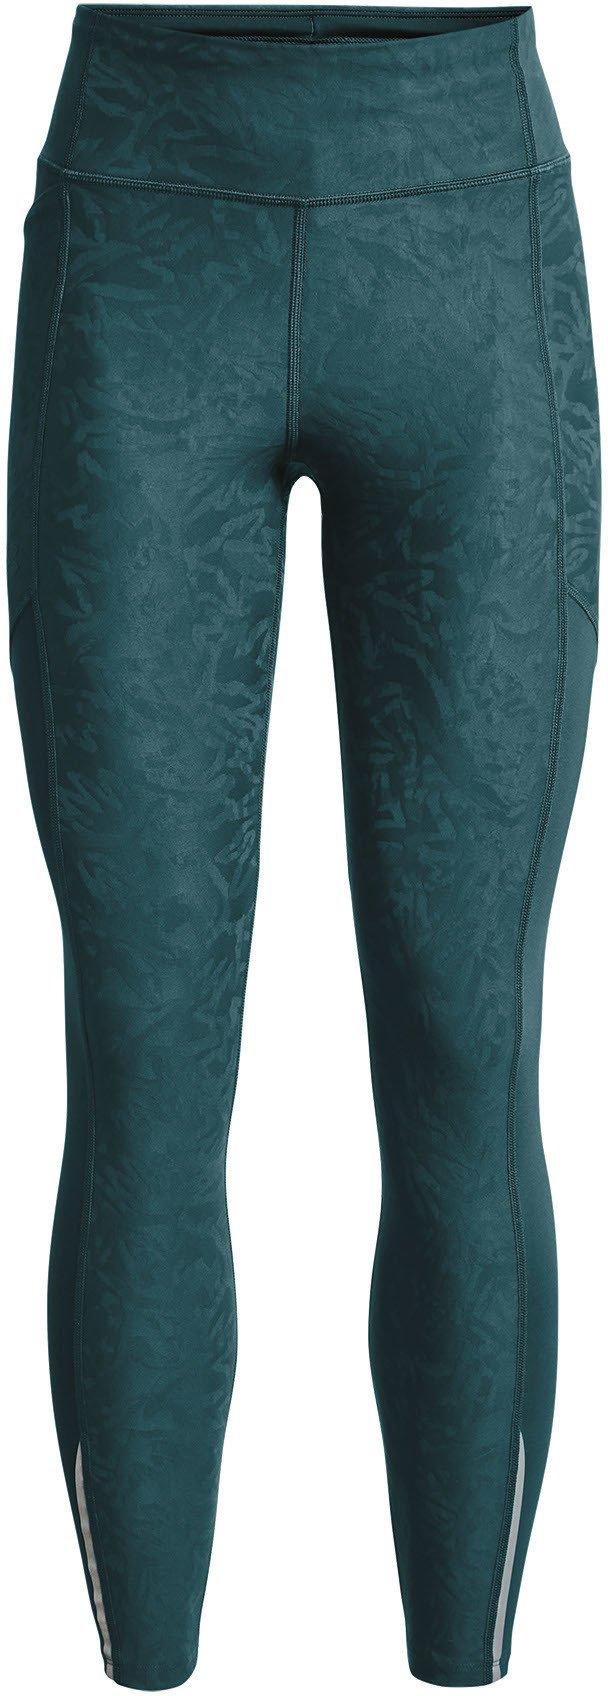 Under Armour Fly Fast 3.0 Tight I-GRN S